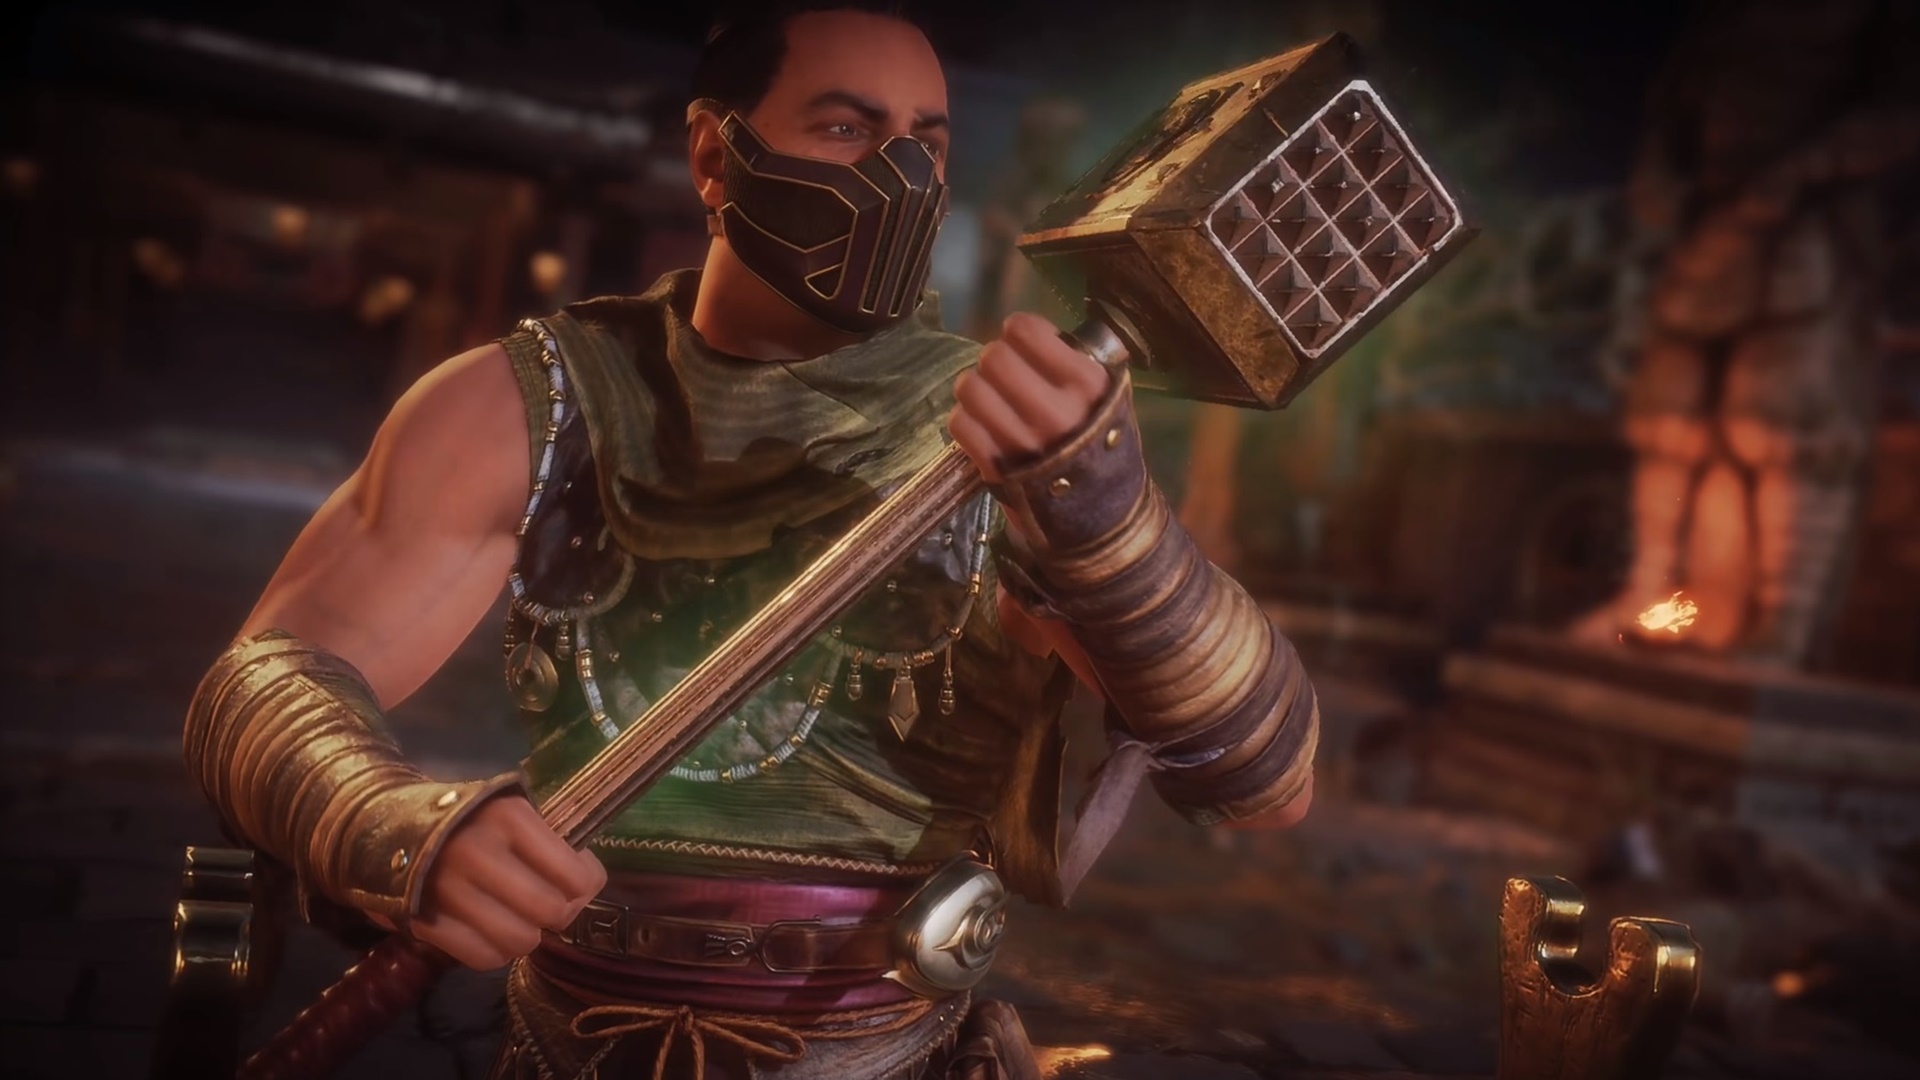 Bugging Out achievement in Mortal Kombat 11